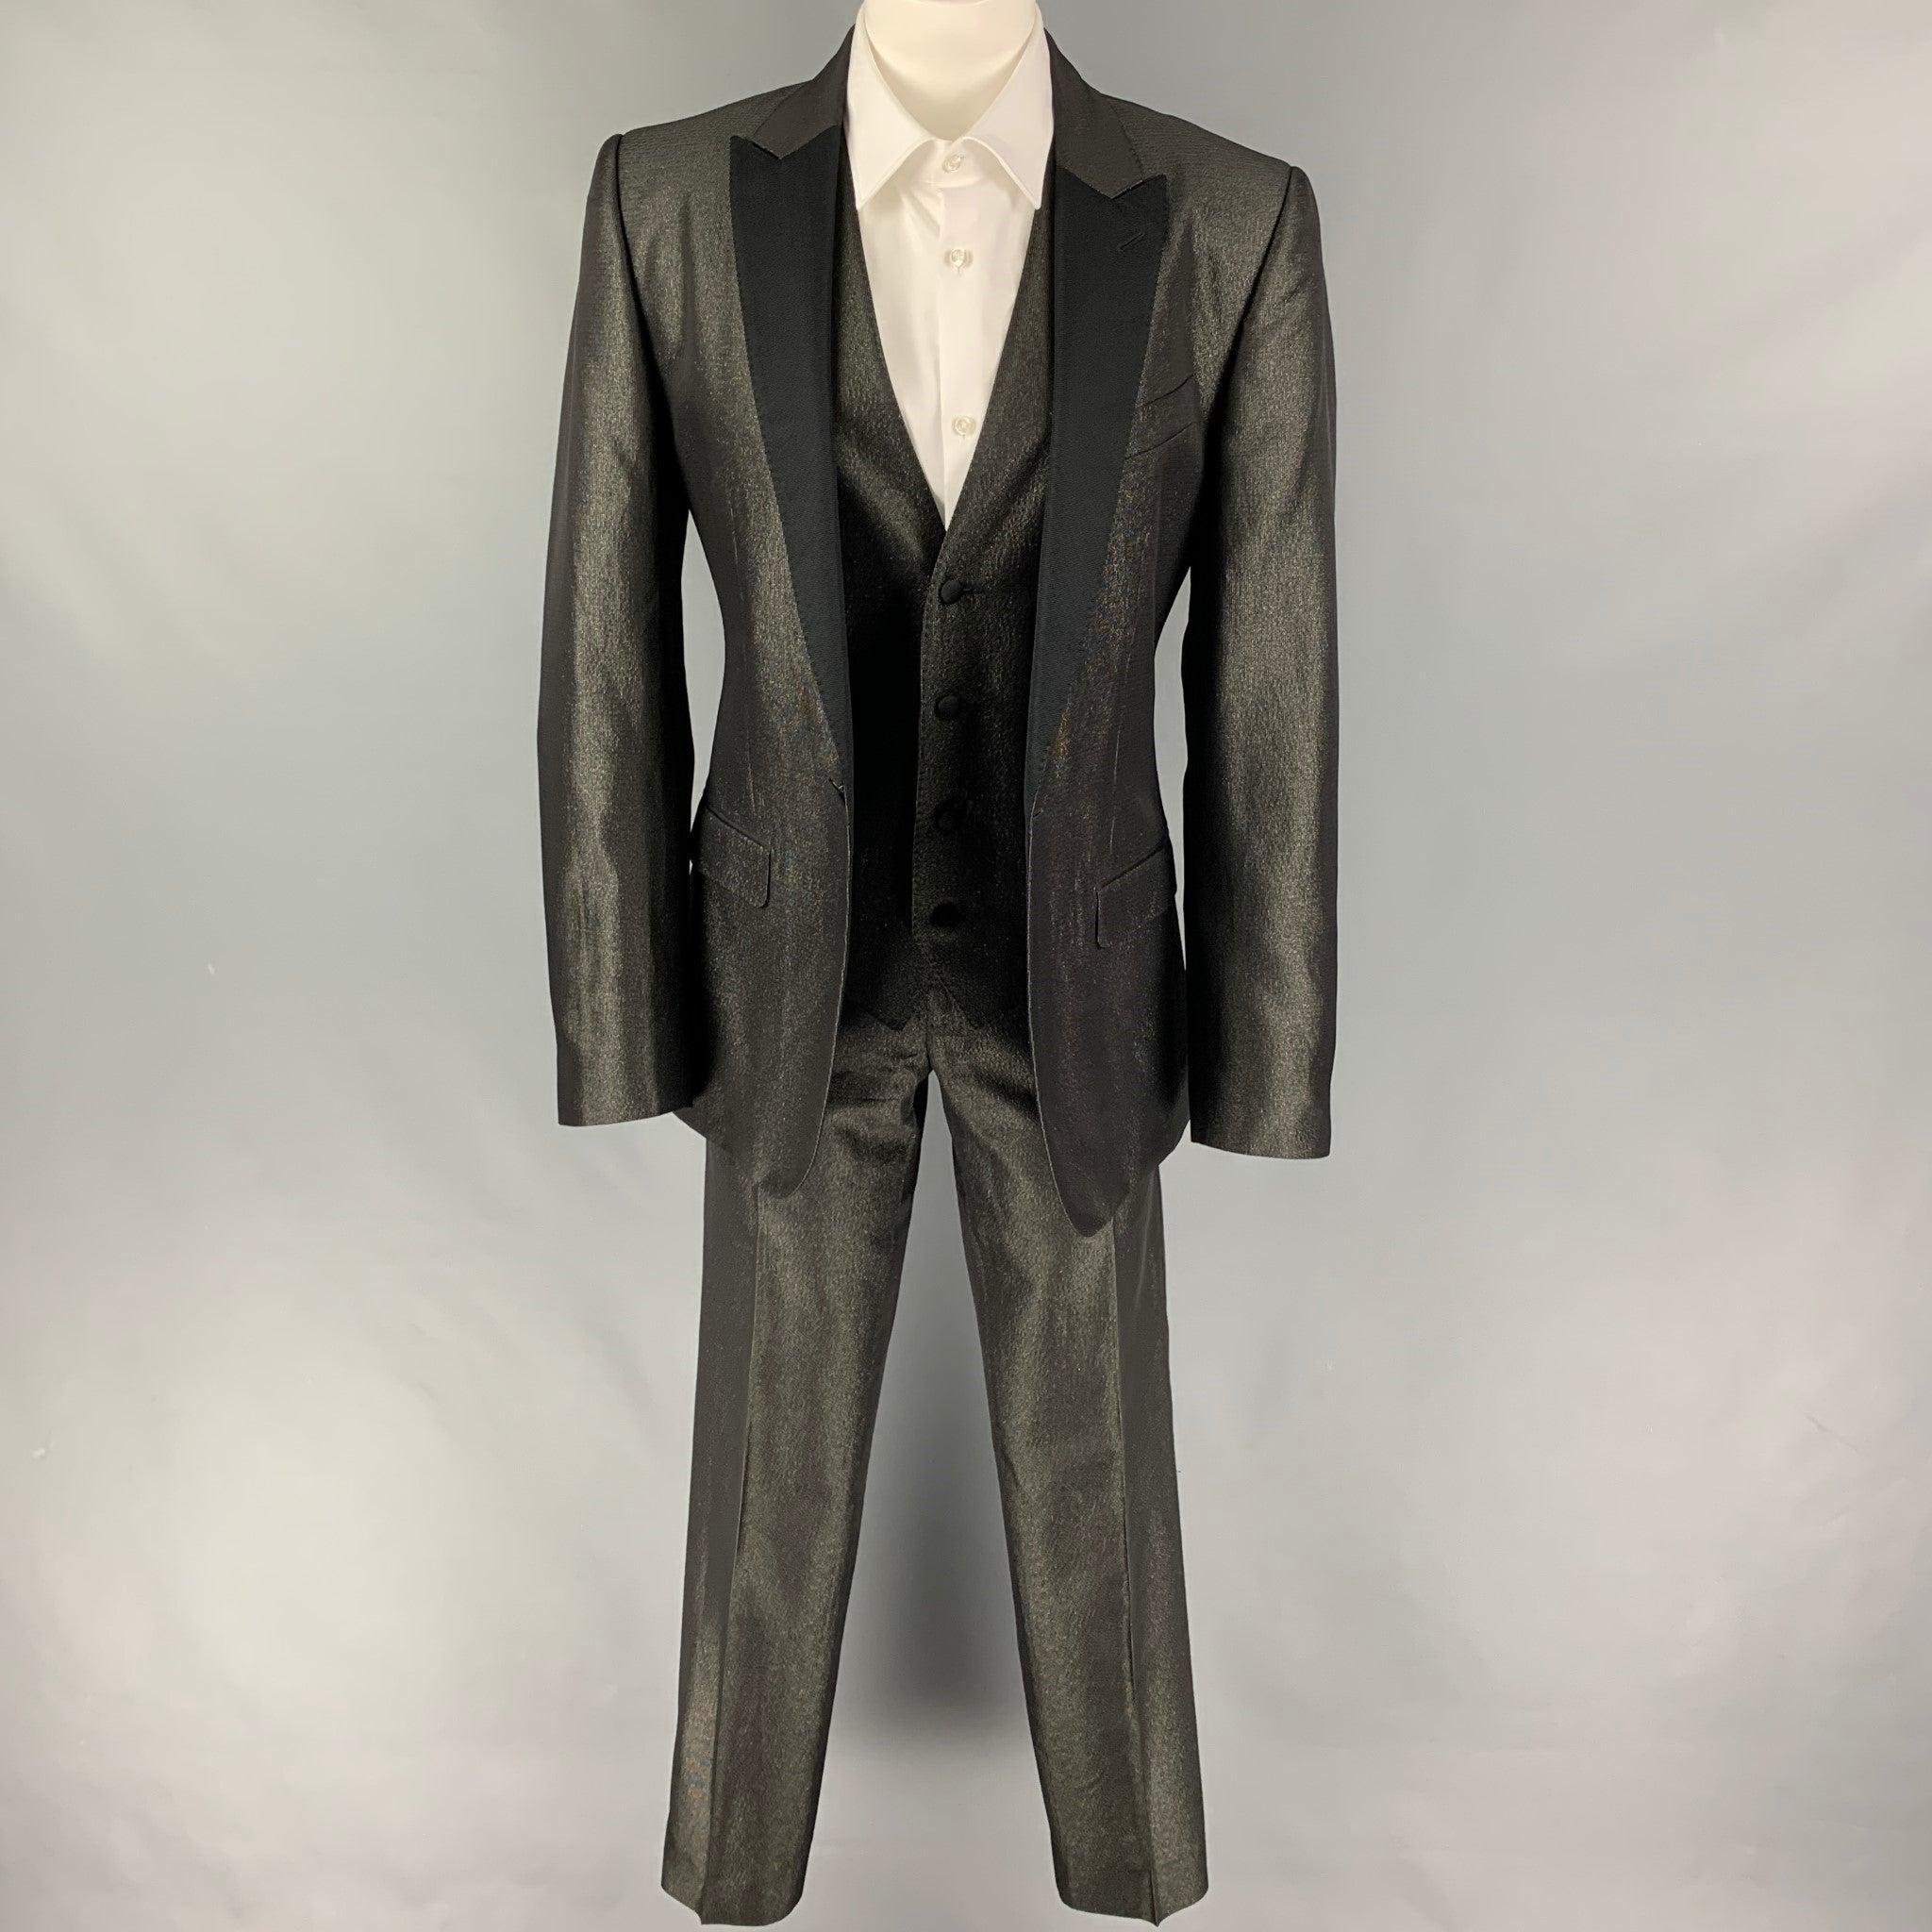 DOLCE & GABBANA 3 Piece Tuxedo
suit comes in a black & gold metallic acetate blend with a full liner and includes a single breasted, one button sport coat with a peak lapel and a matching vest and flat front trousers. Made in Italy. Excellent